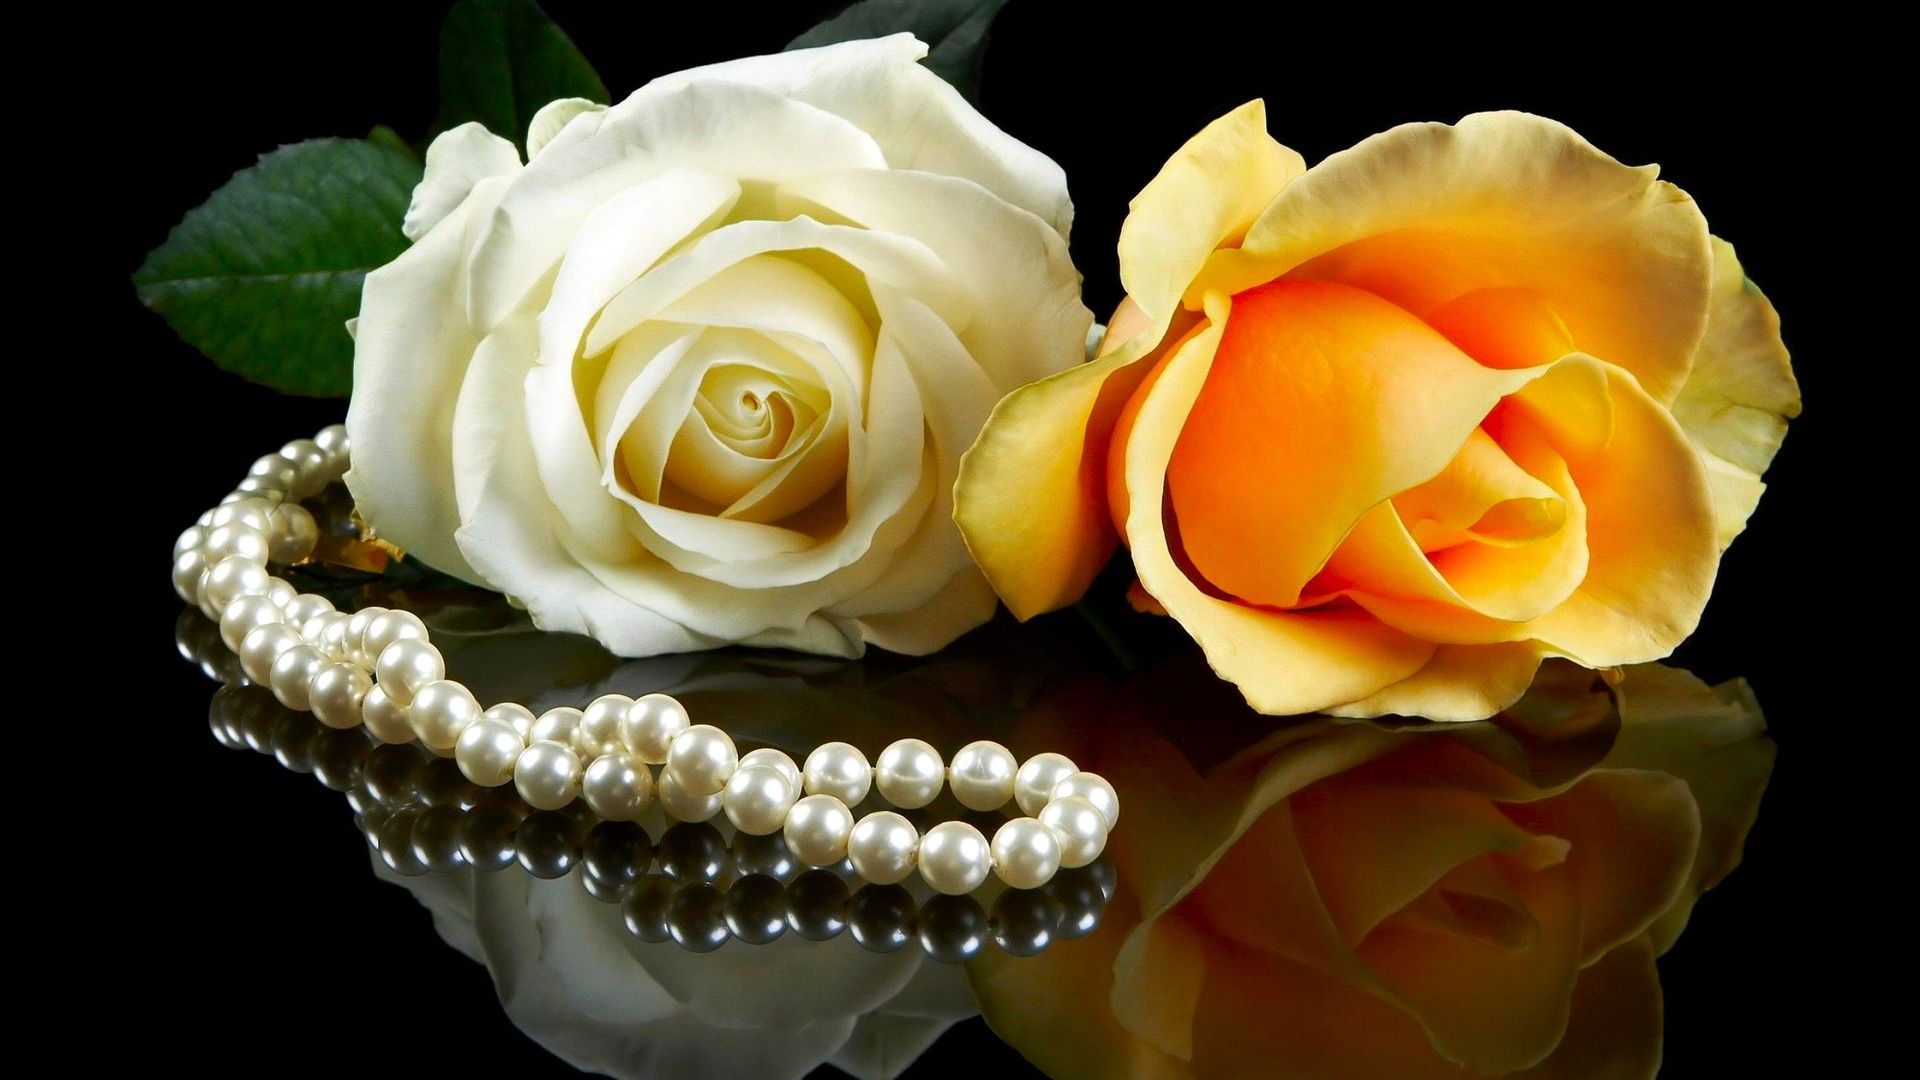 White And Yellow Rose Wallpaper - Pearls On Black Background With Rose - HD Wallpaper 